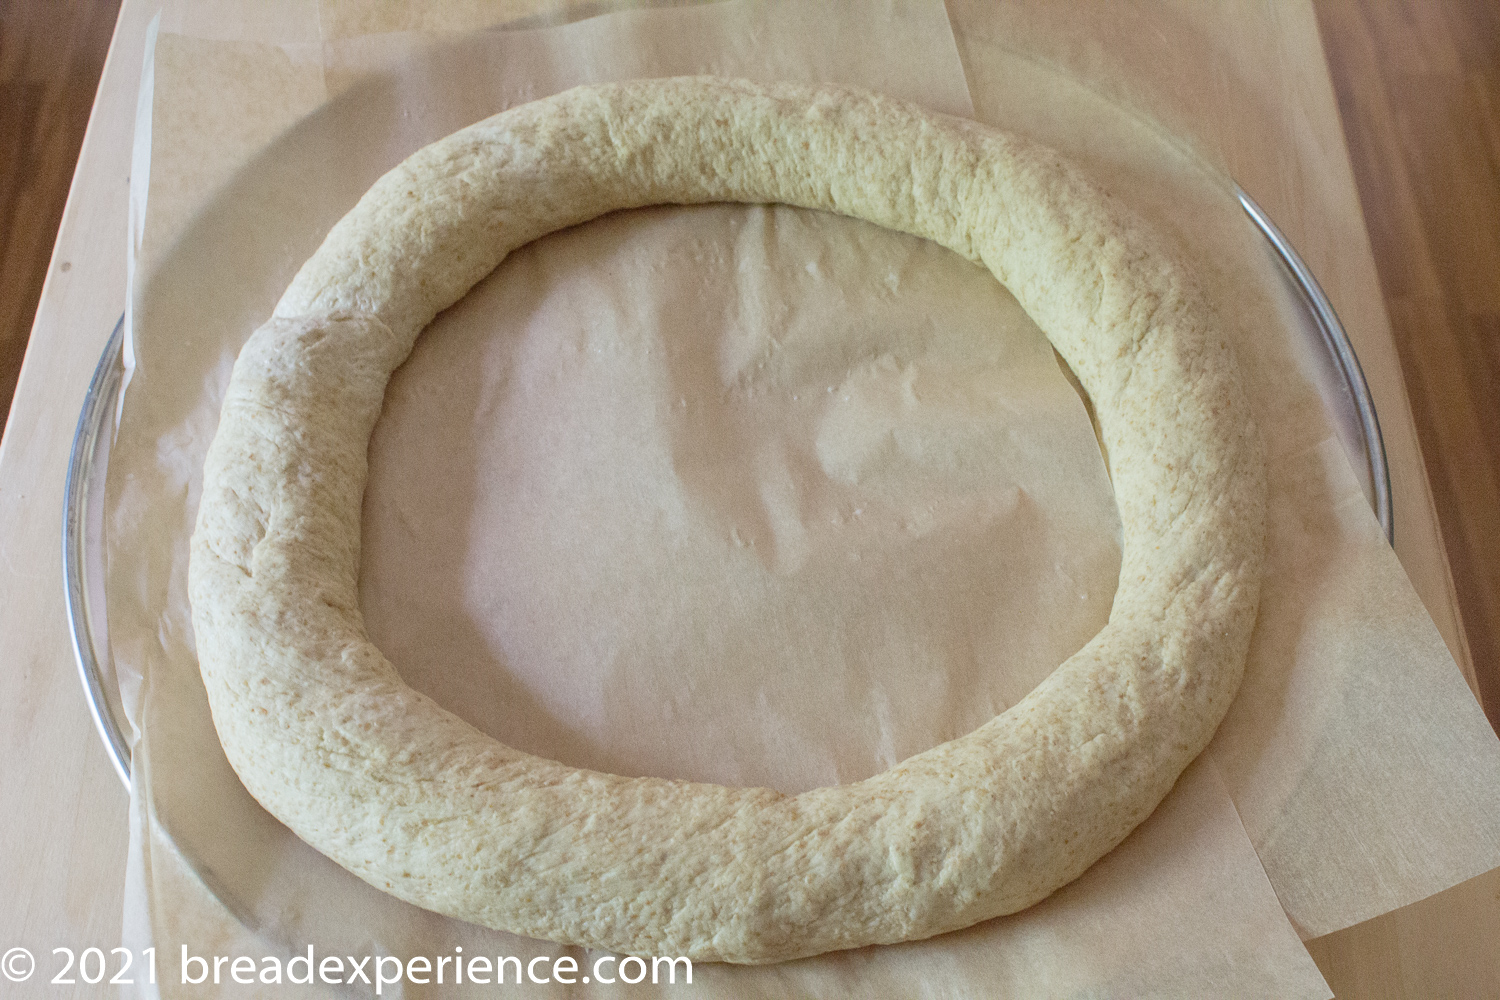 shaped wreath on parchment-lined pizza pan